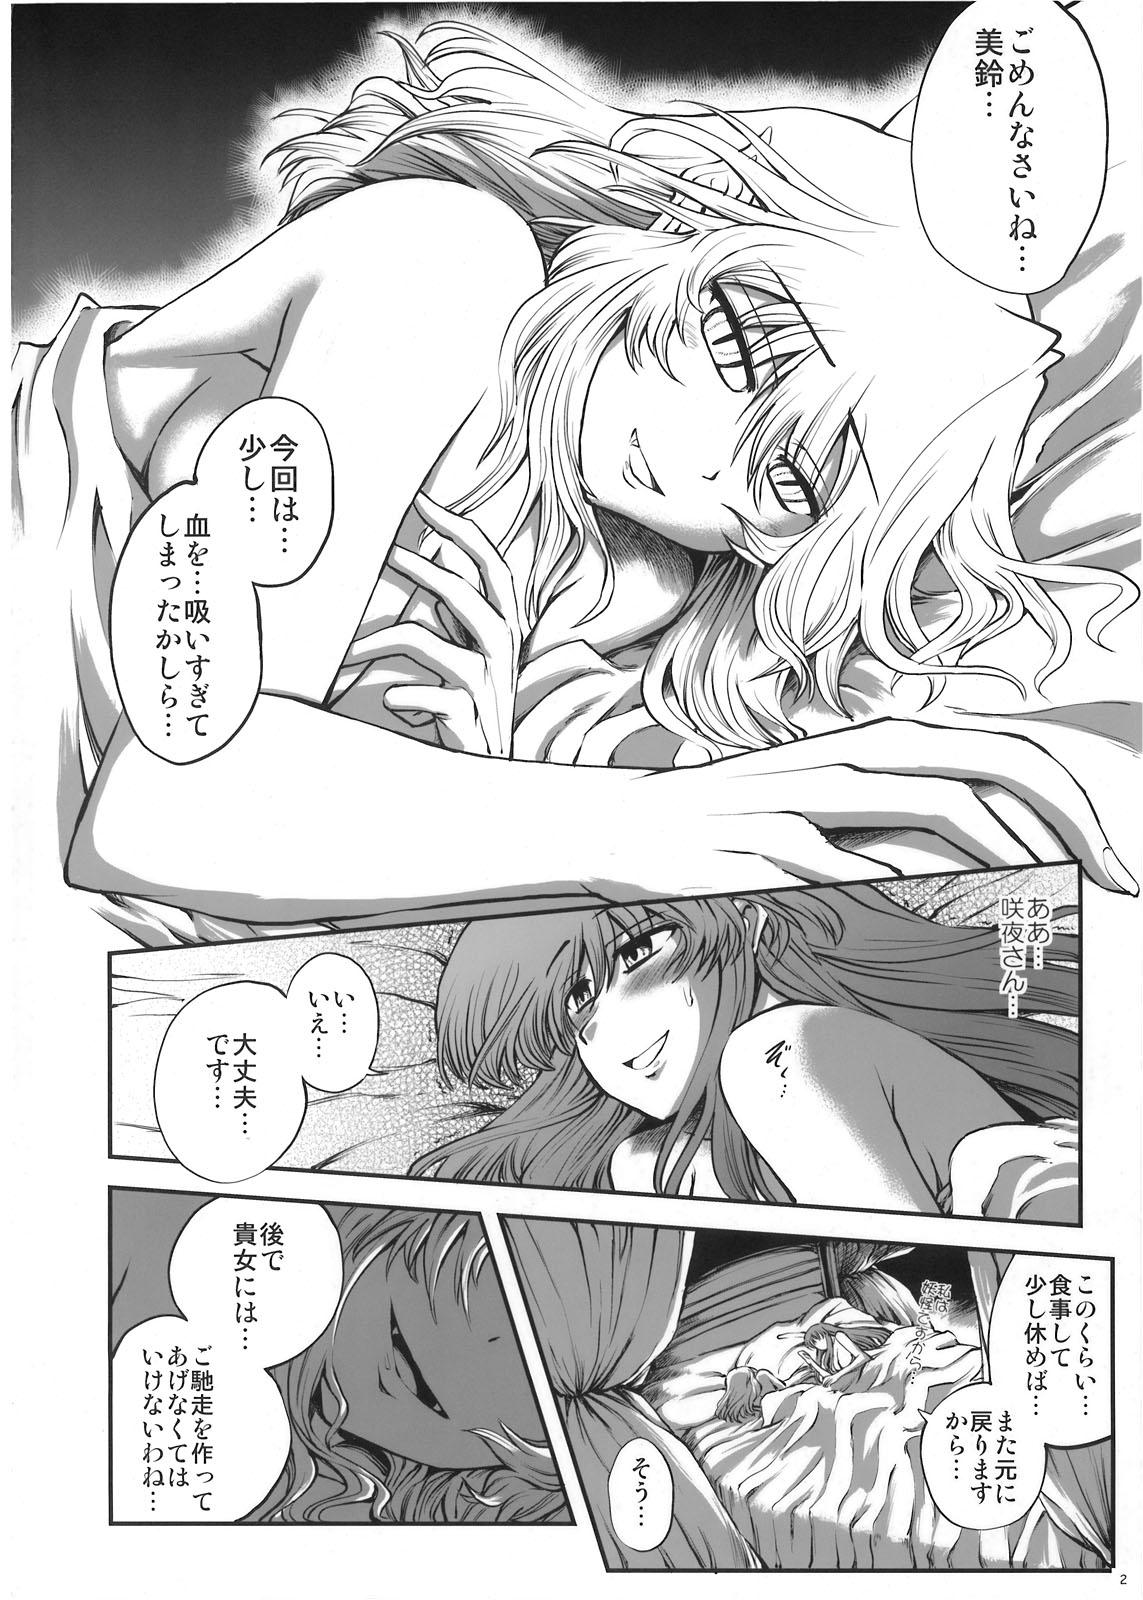 Arabe Luna Dial Maid to Chi no Unmei dokei Lunatic+alpha - Touhou project Glamour - Page 3